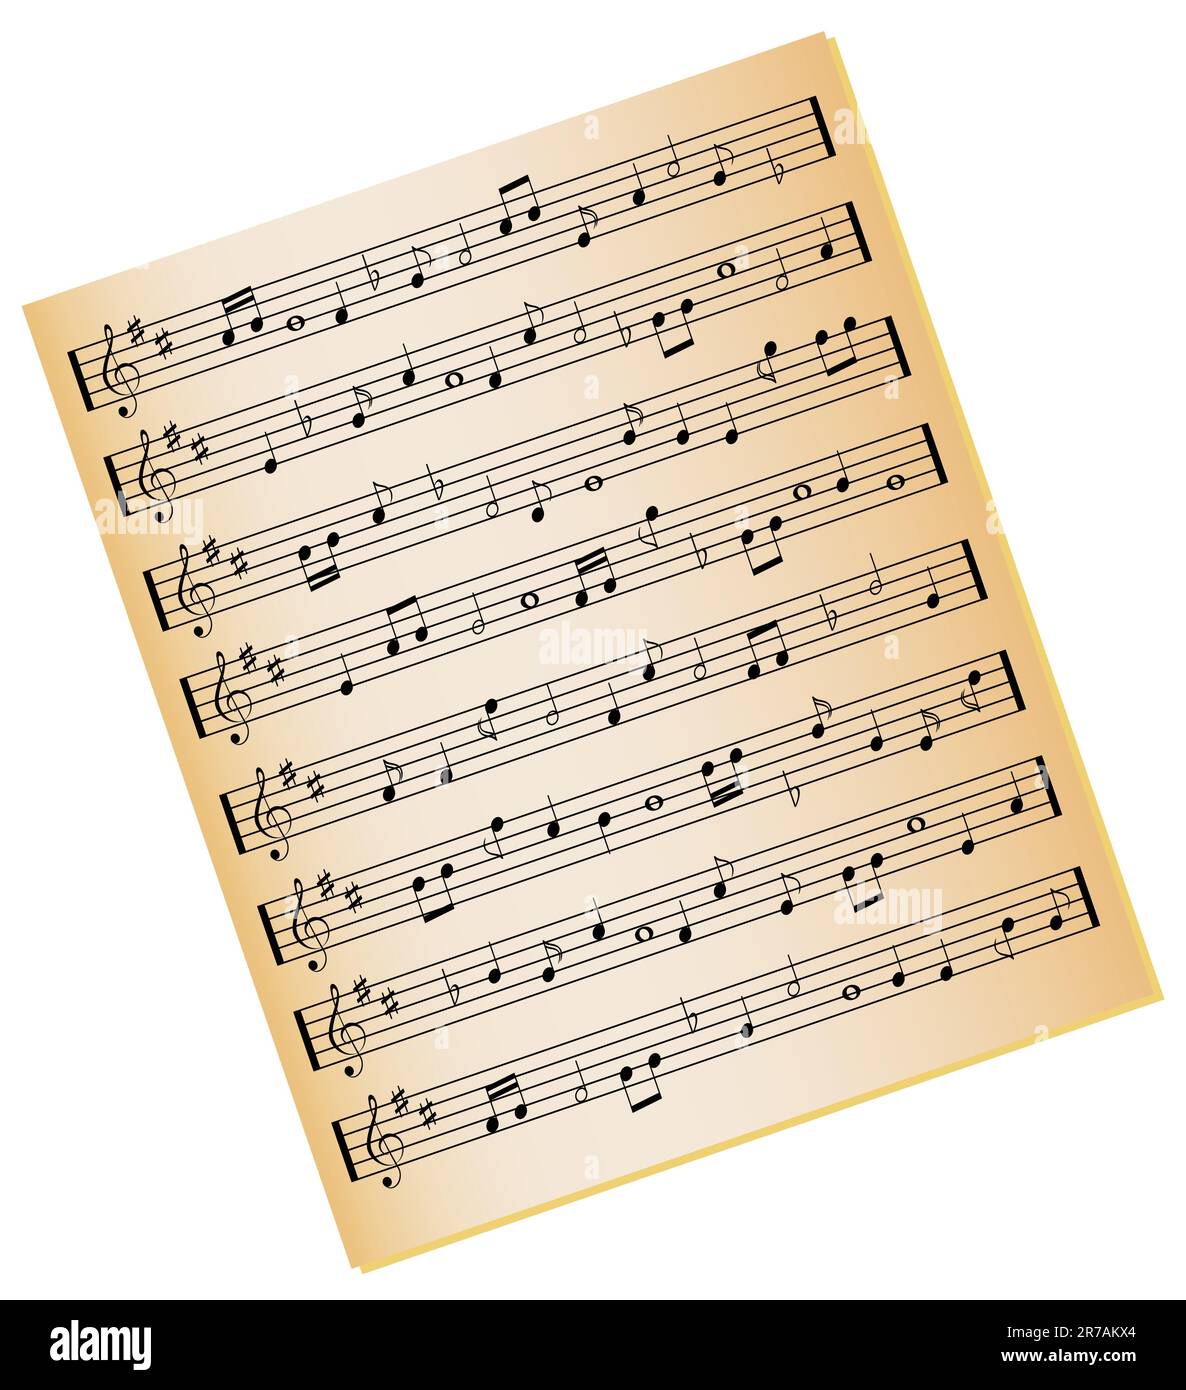 Sheet music on gold color paper Stock Vector